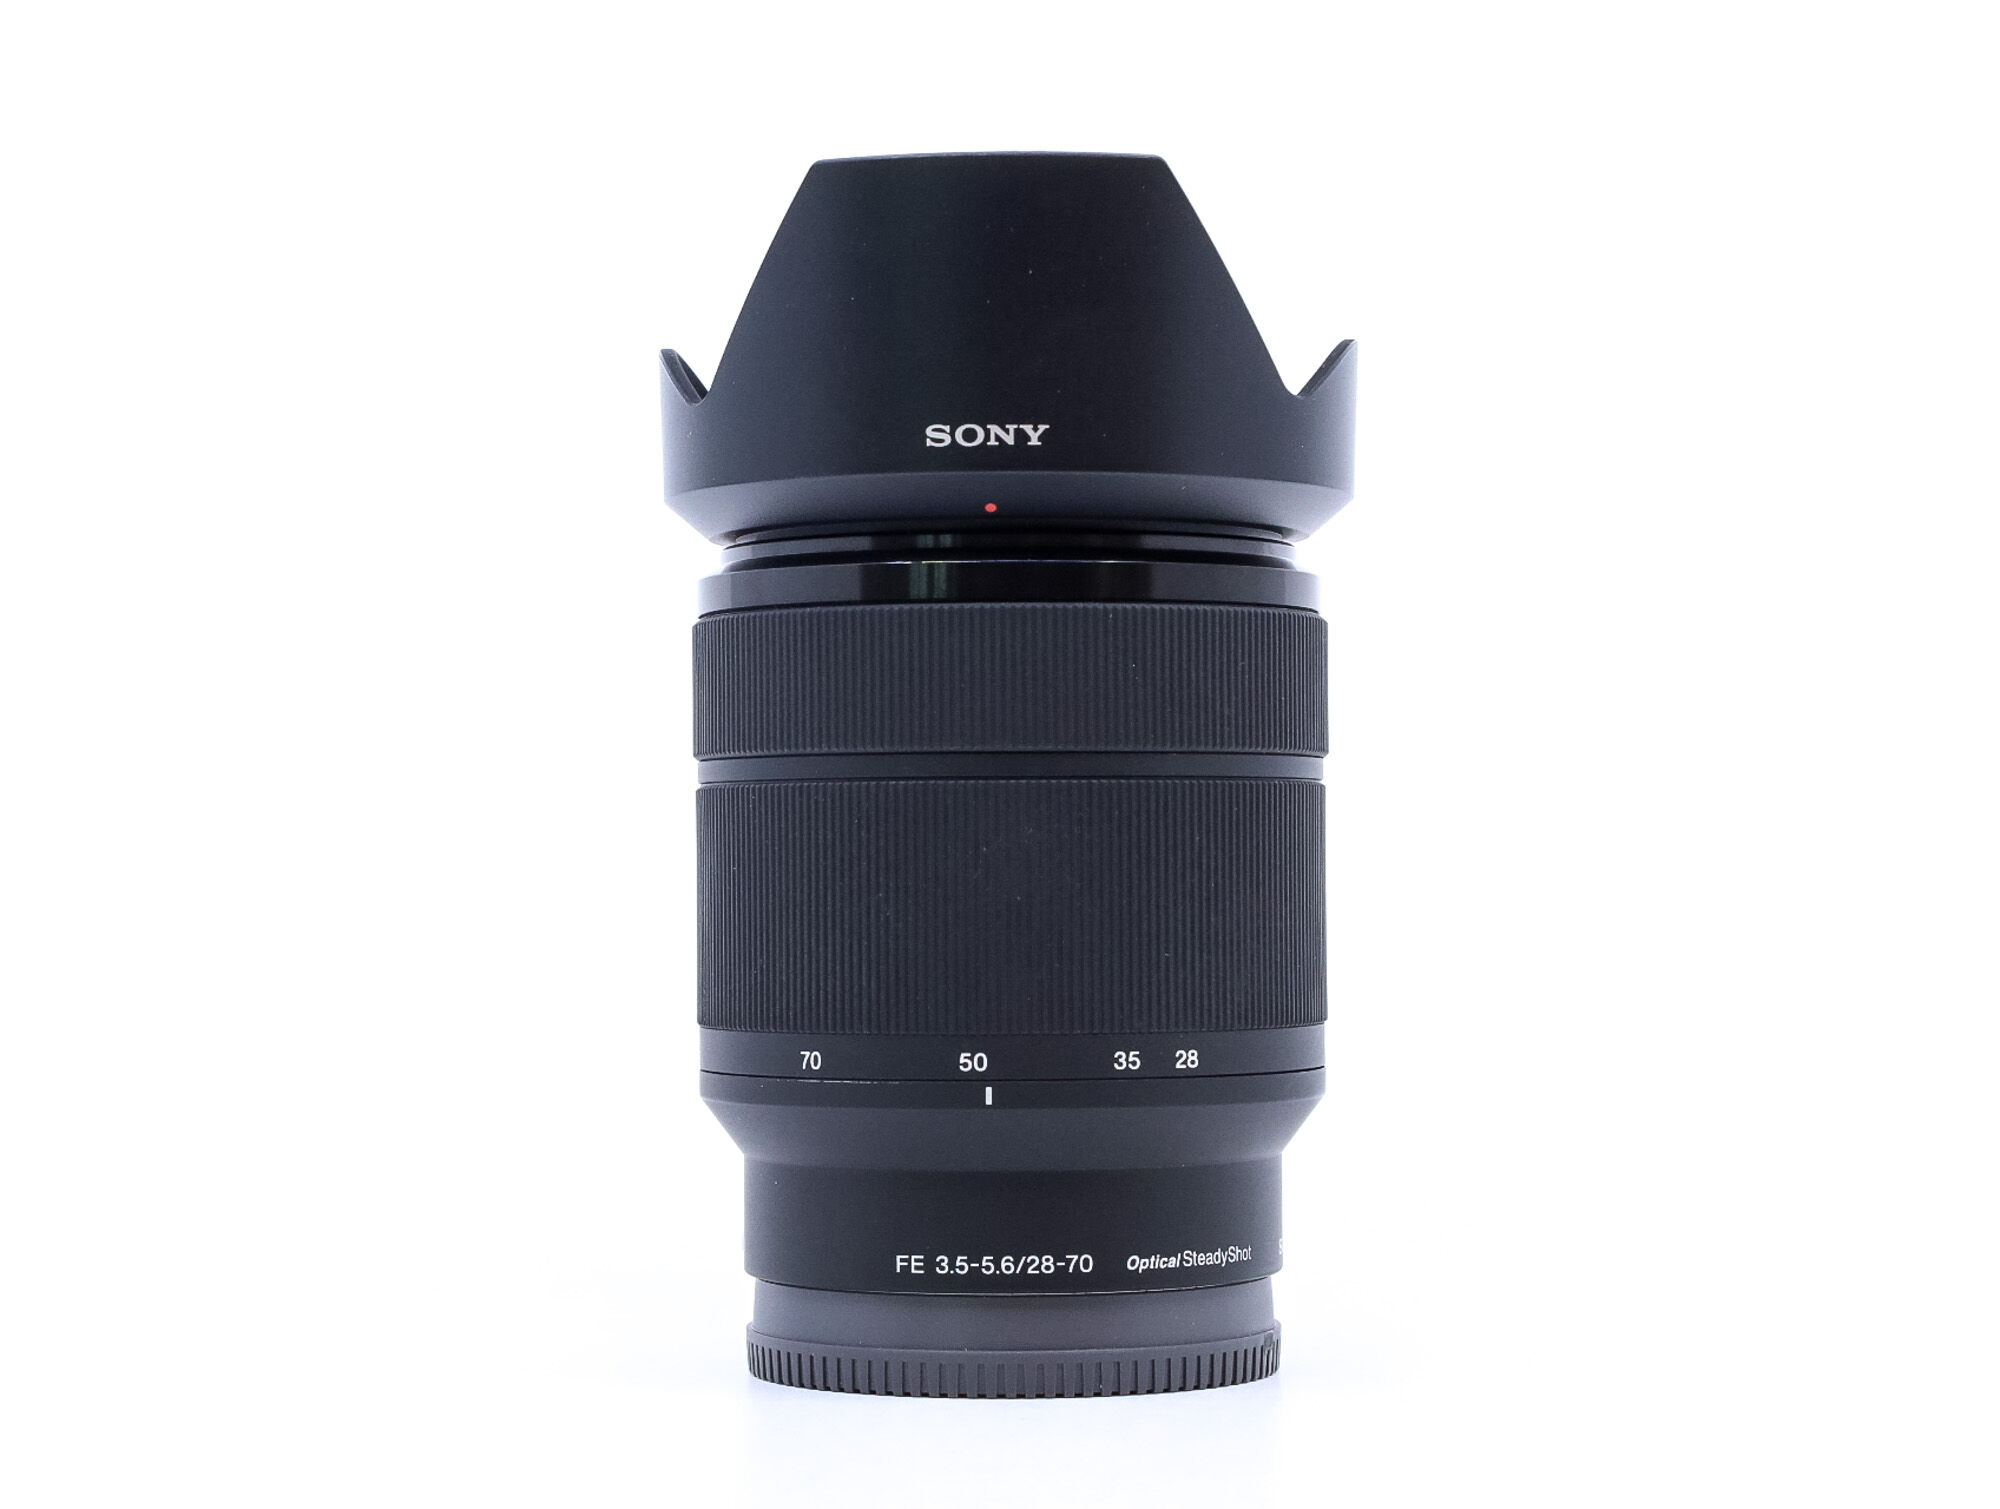 Sony FE 28-70mm f/3.5-5.6 OSS (Condition: Excellent)